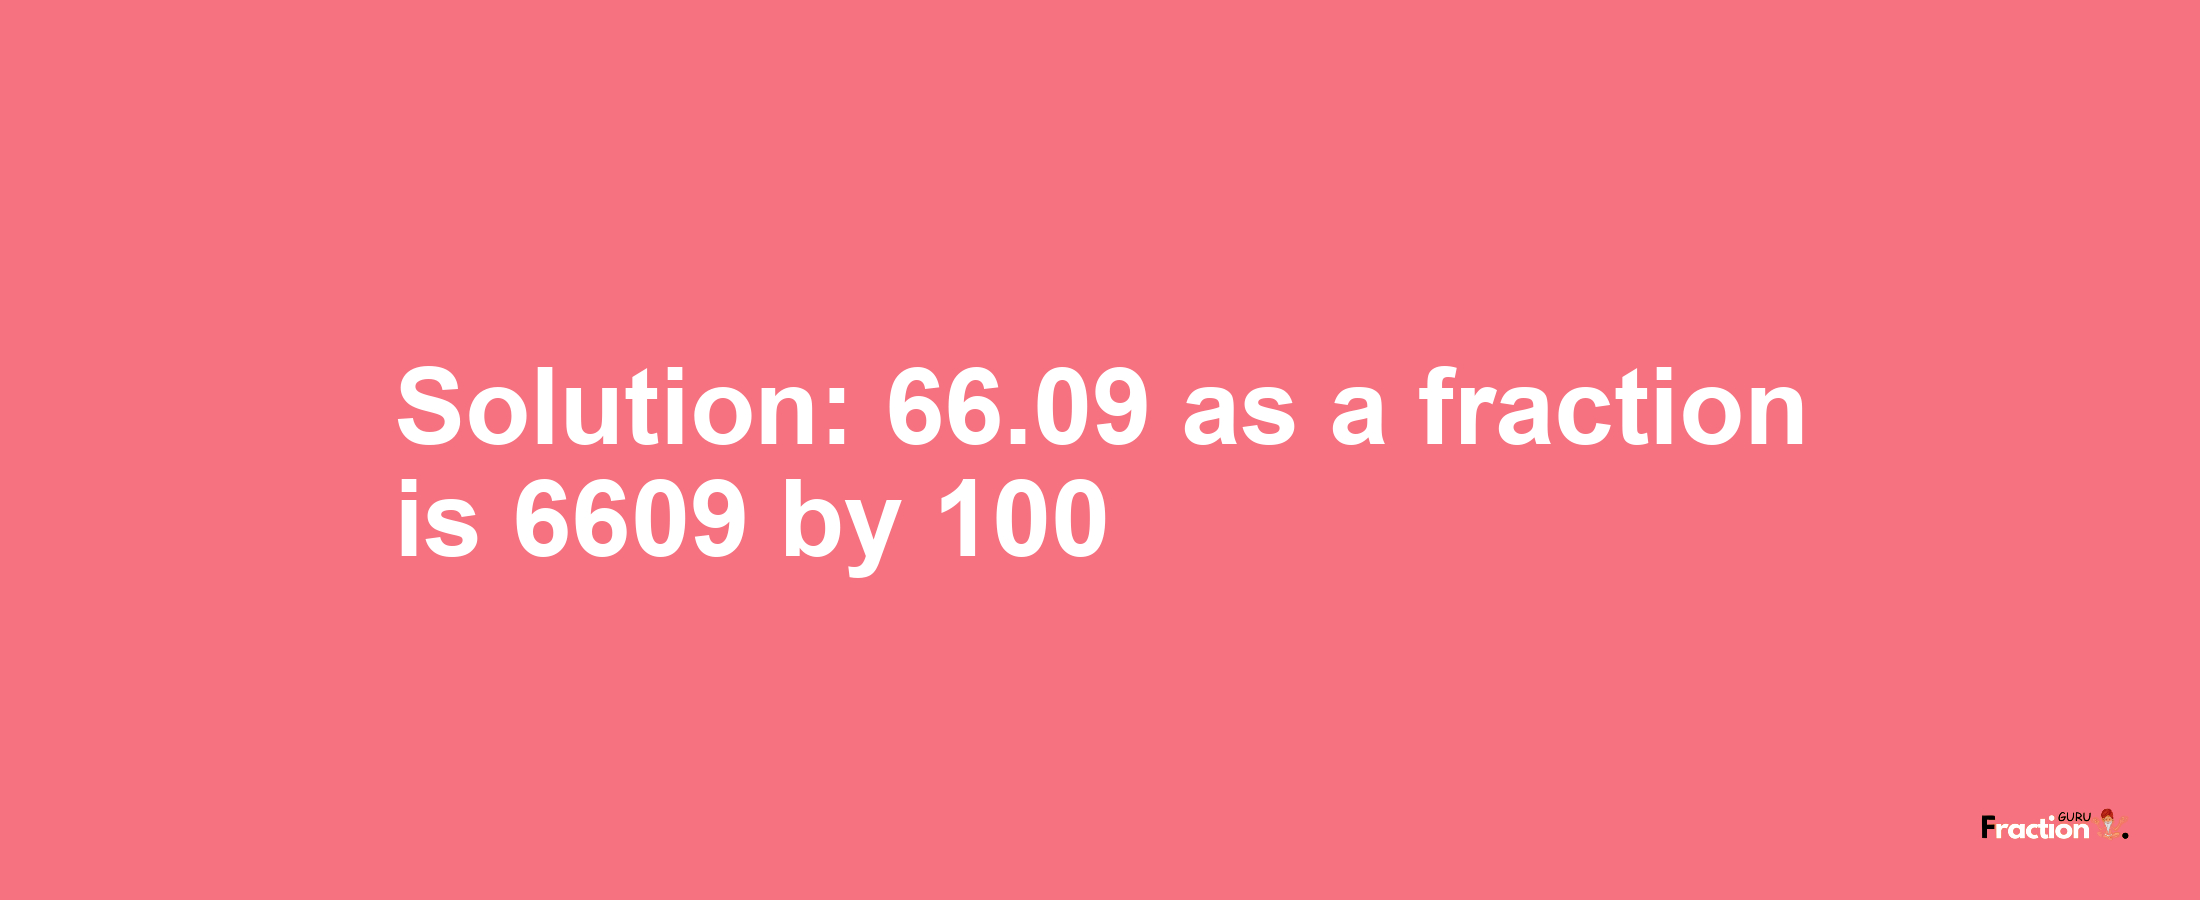 Solution:66.09 as a fraction is 6609/100